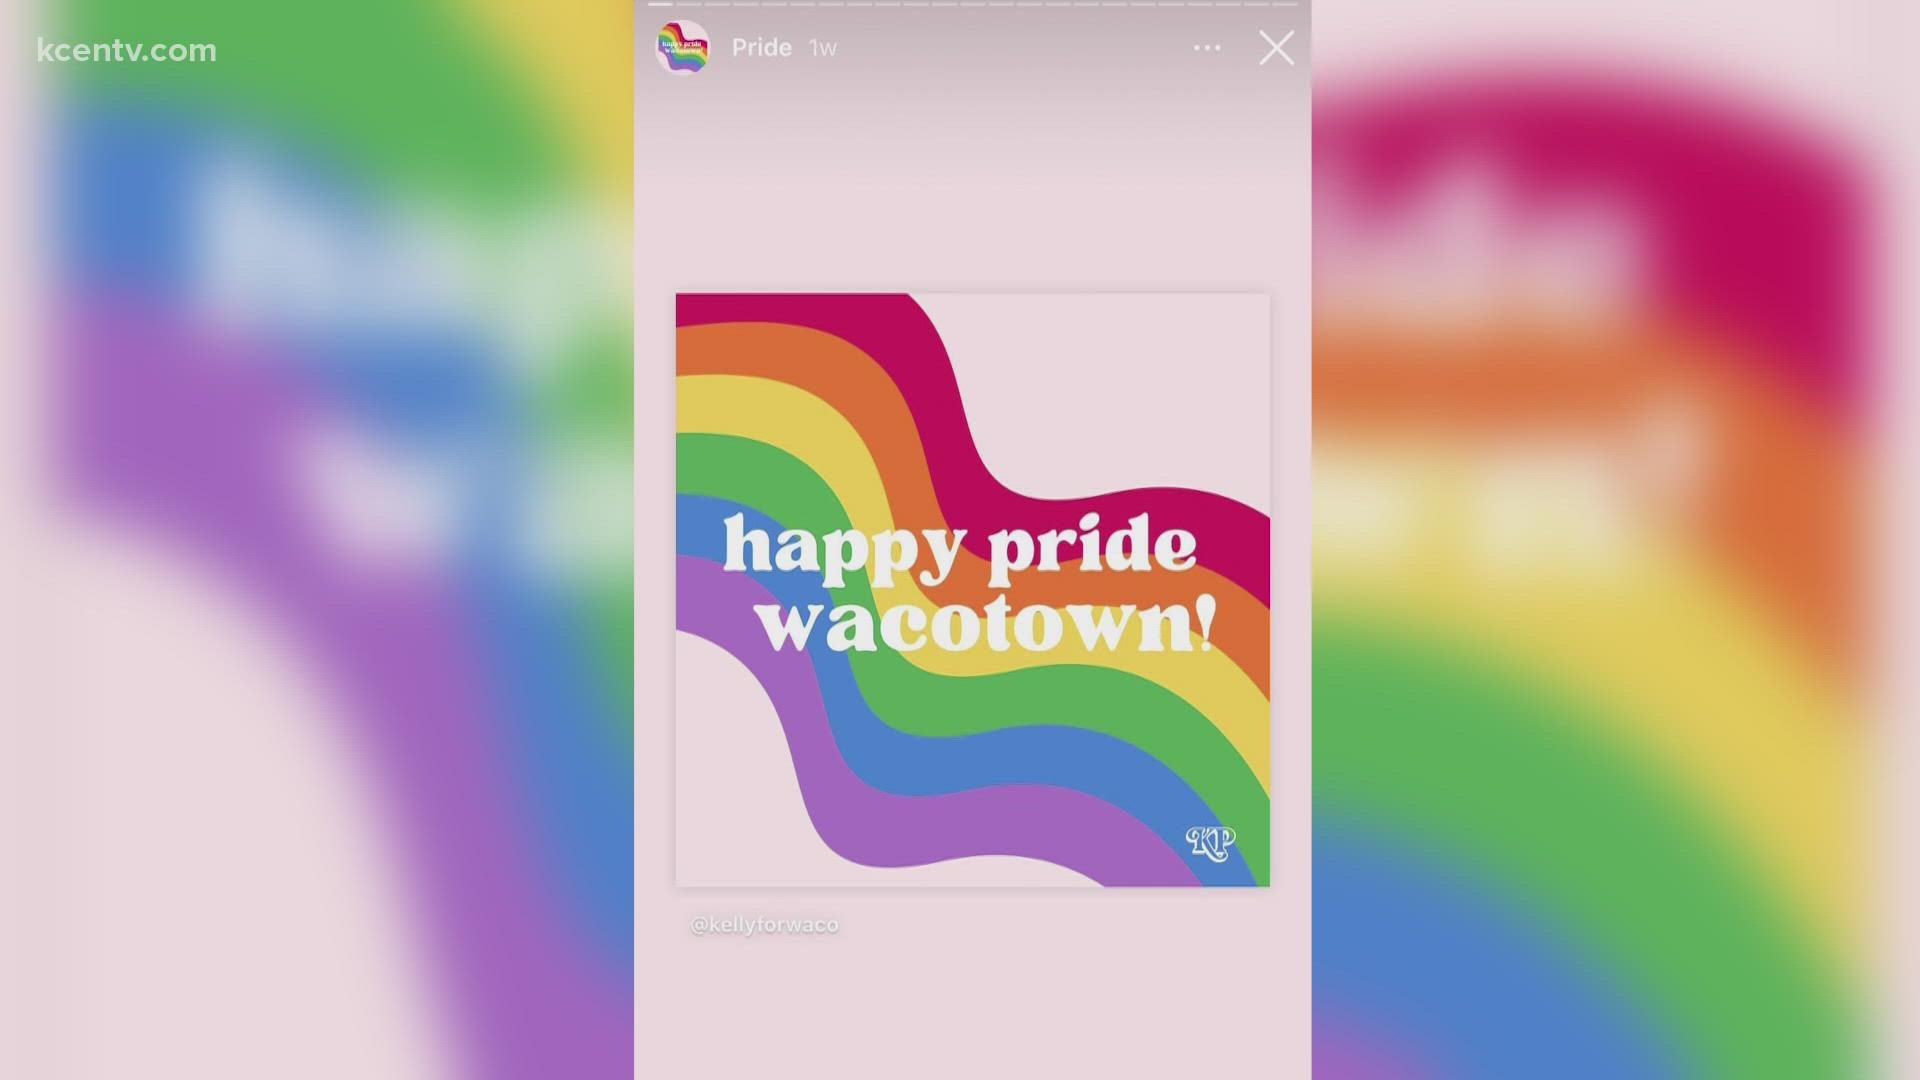 One business owner said she received hate messages despite showing her support for Pride month. Despite the harassment, she said she will continue to show love.